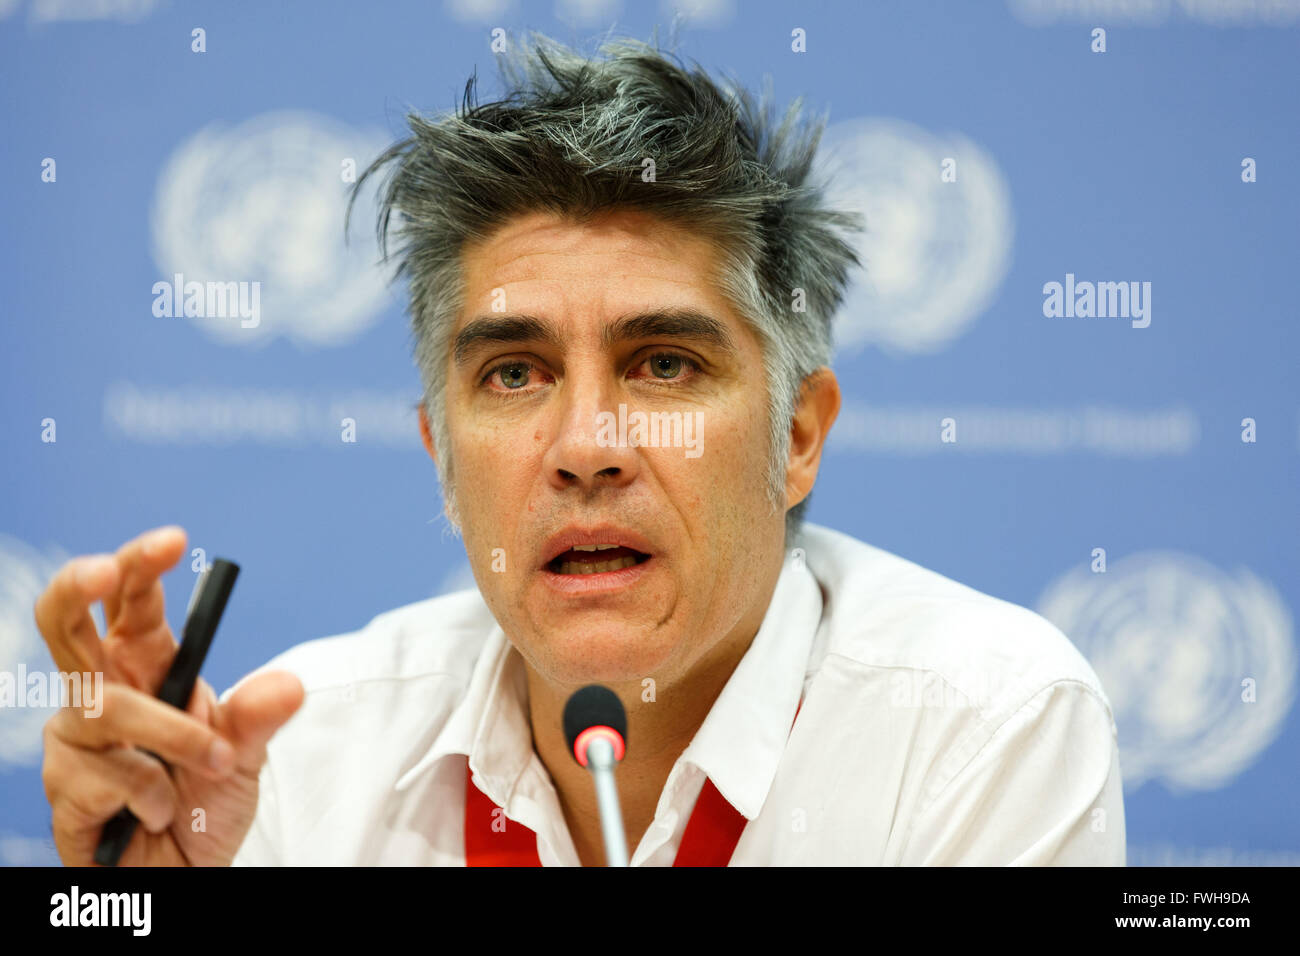 New York, United Nations headquarters in New York. 5th Apr, 2016. Alejandro Aravena, Chilean architect and winner of the Pritzker Architecture Prize for 2016, briefs journalists on the link between architecture and sustainable development, at the United Nations headquarters in New York, April 5, 2016. The Sustainable Development Goals Fund (SDGF) and Pritzker Architecture Prize laureate Alejandro Aravena draw on the role of architecture to improve livelihoods and achieve Sustainable Development Goals (SDG). © Li Muzi/Xinhua/Alamy Live News Stock Photo